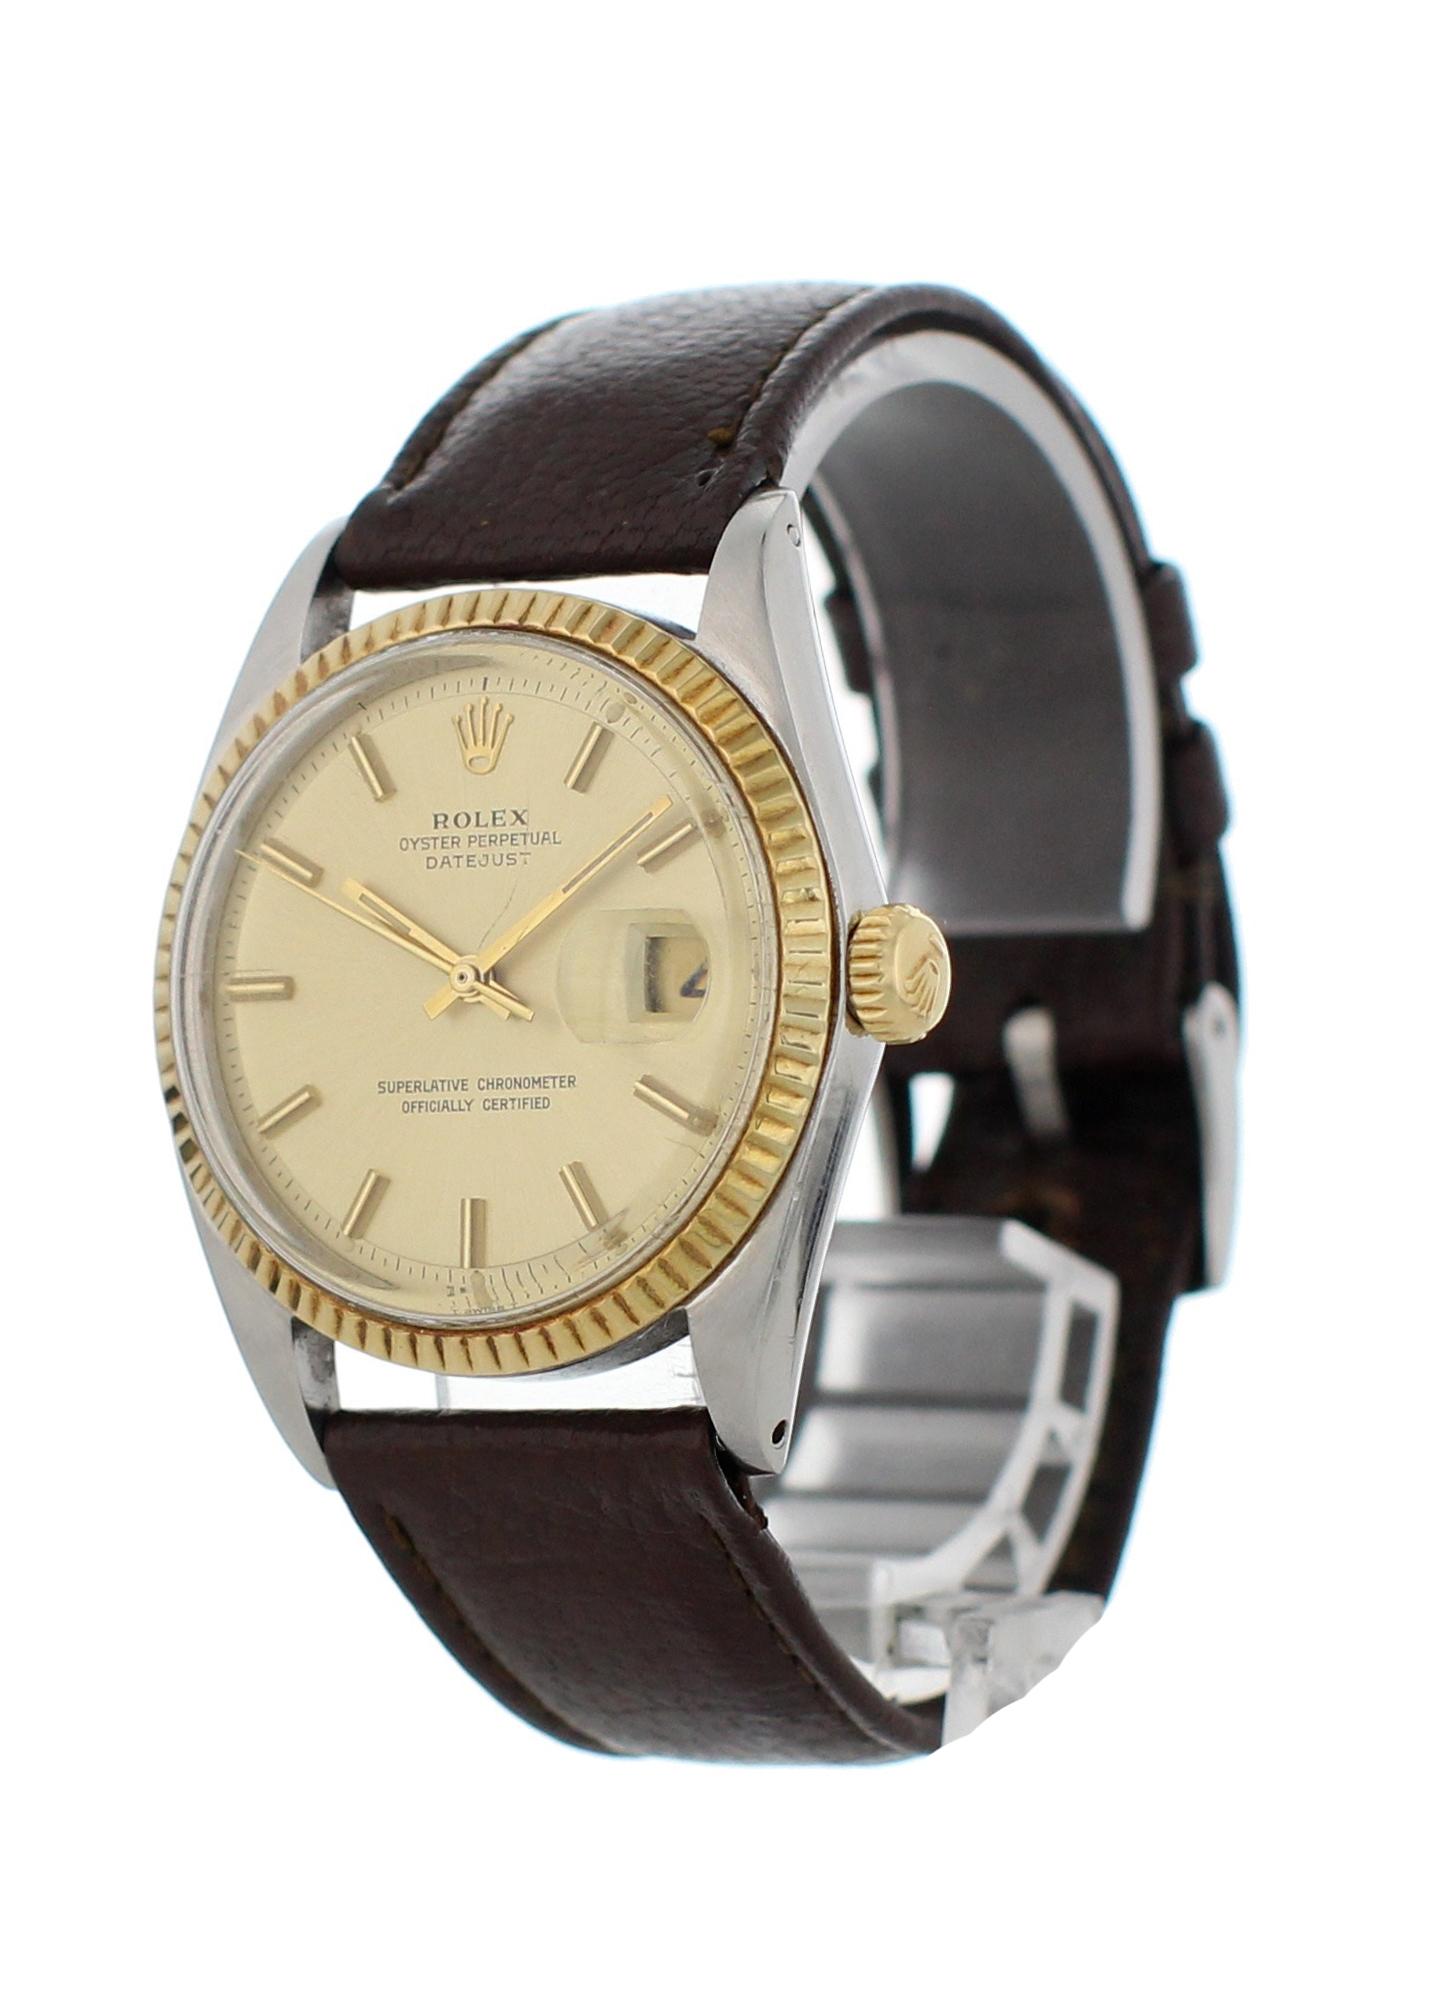 Rolex Oyster Perpetual Datejust 1601 Men's Watch. Stainless steel 36mm case. 18k Yellow gold bezel. Champagne dial with gold hands and stick markers. Brown leather strap with Rolex buckle. Will fit up to a 7.25-inch wrist. Automatic self-wind